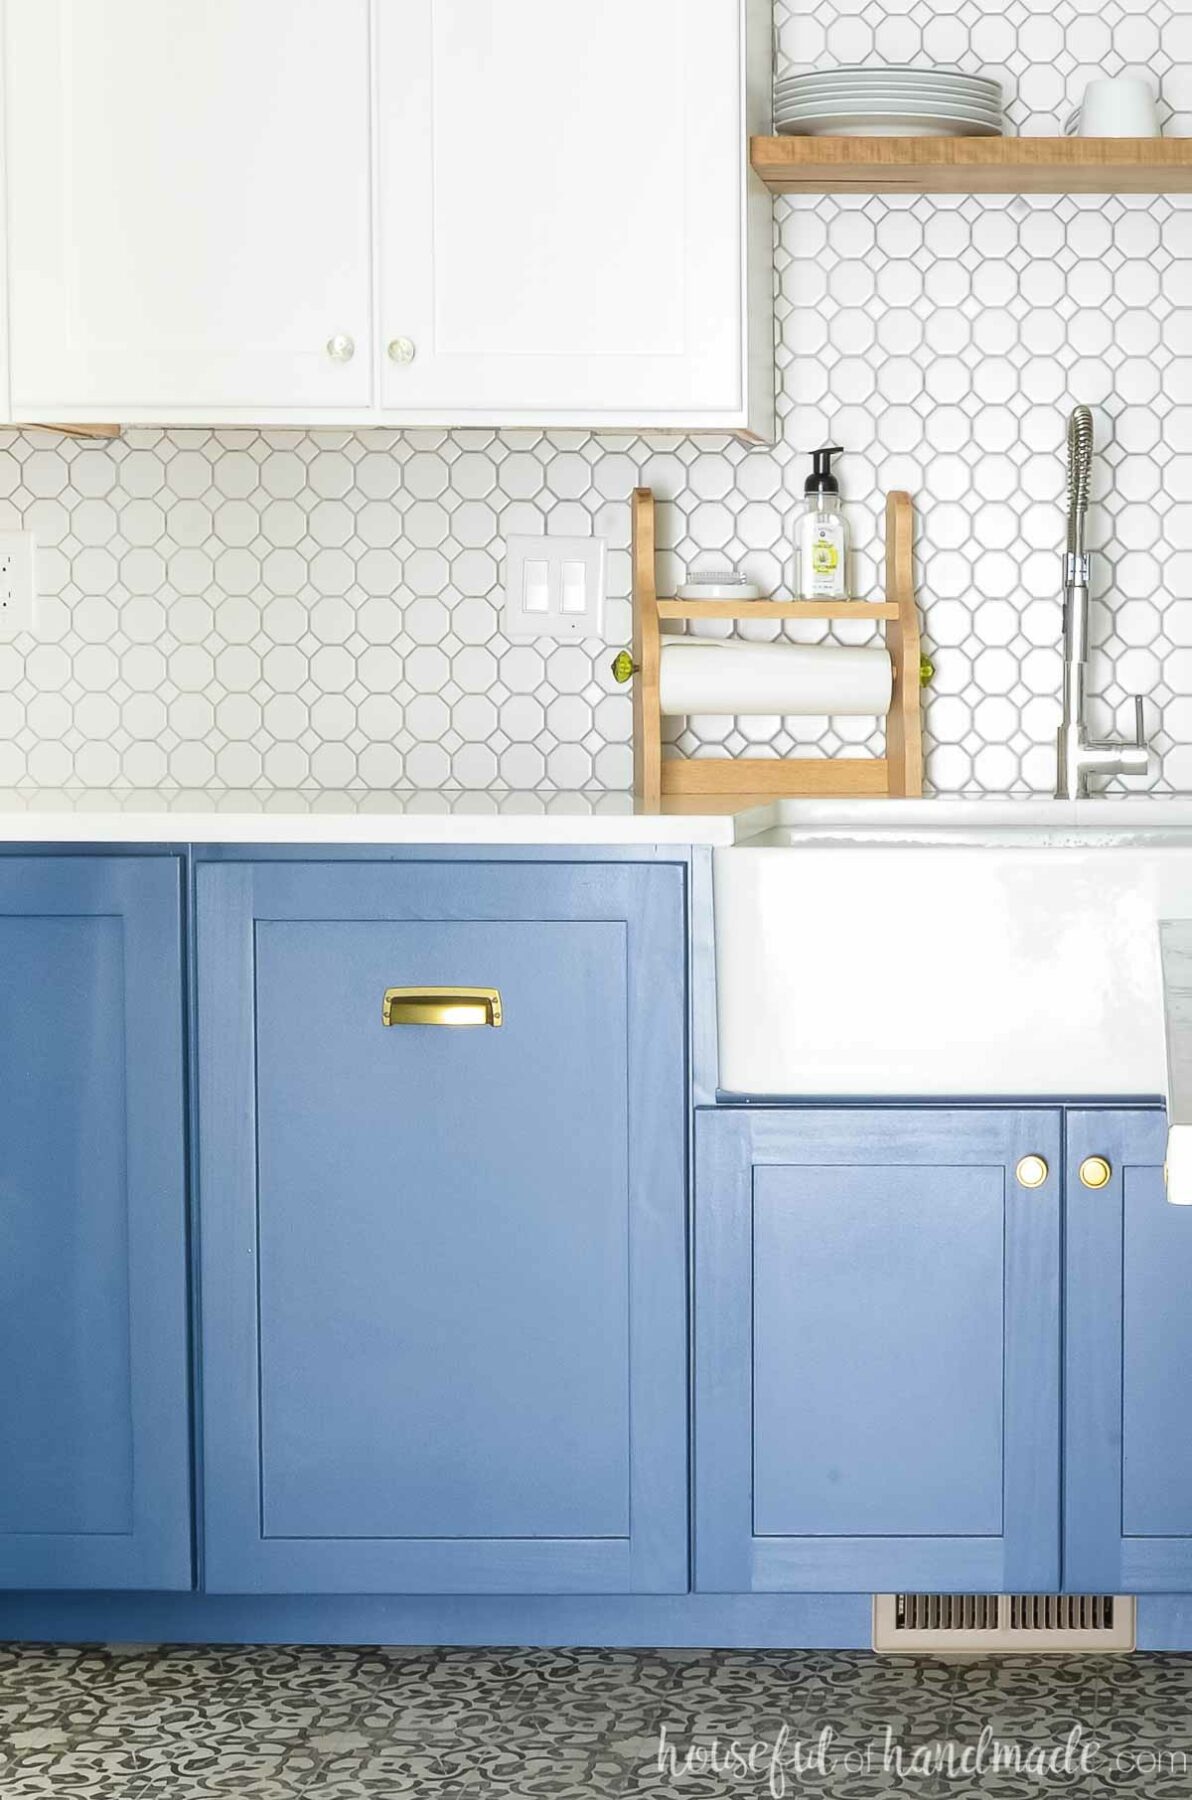 Blue and white kitchen with trash cans hidden behind a cabinet door next to a white farmhouse sink.